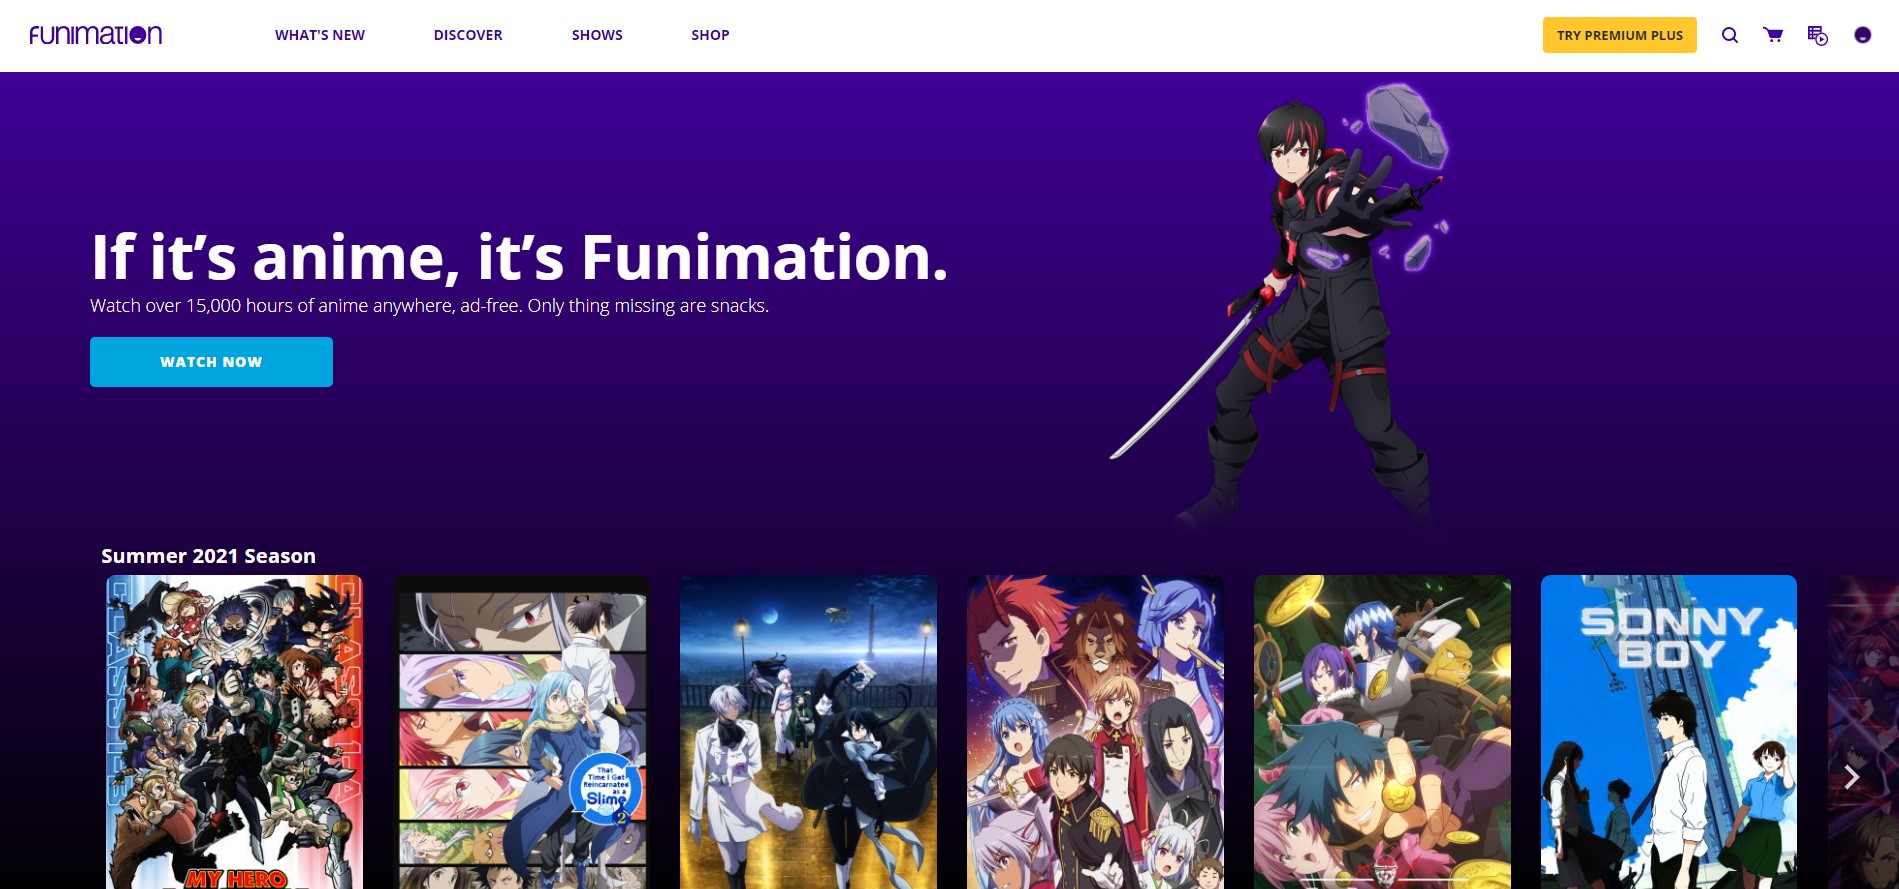 Funimation free trial is one available and how to get it? TechRadar